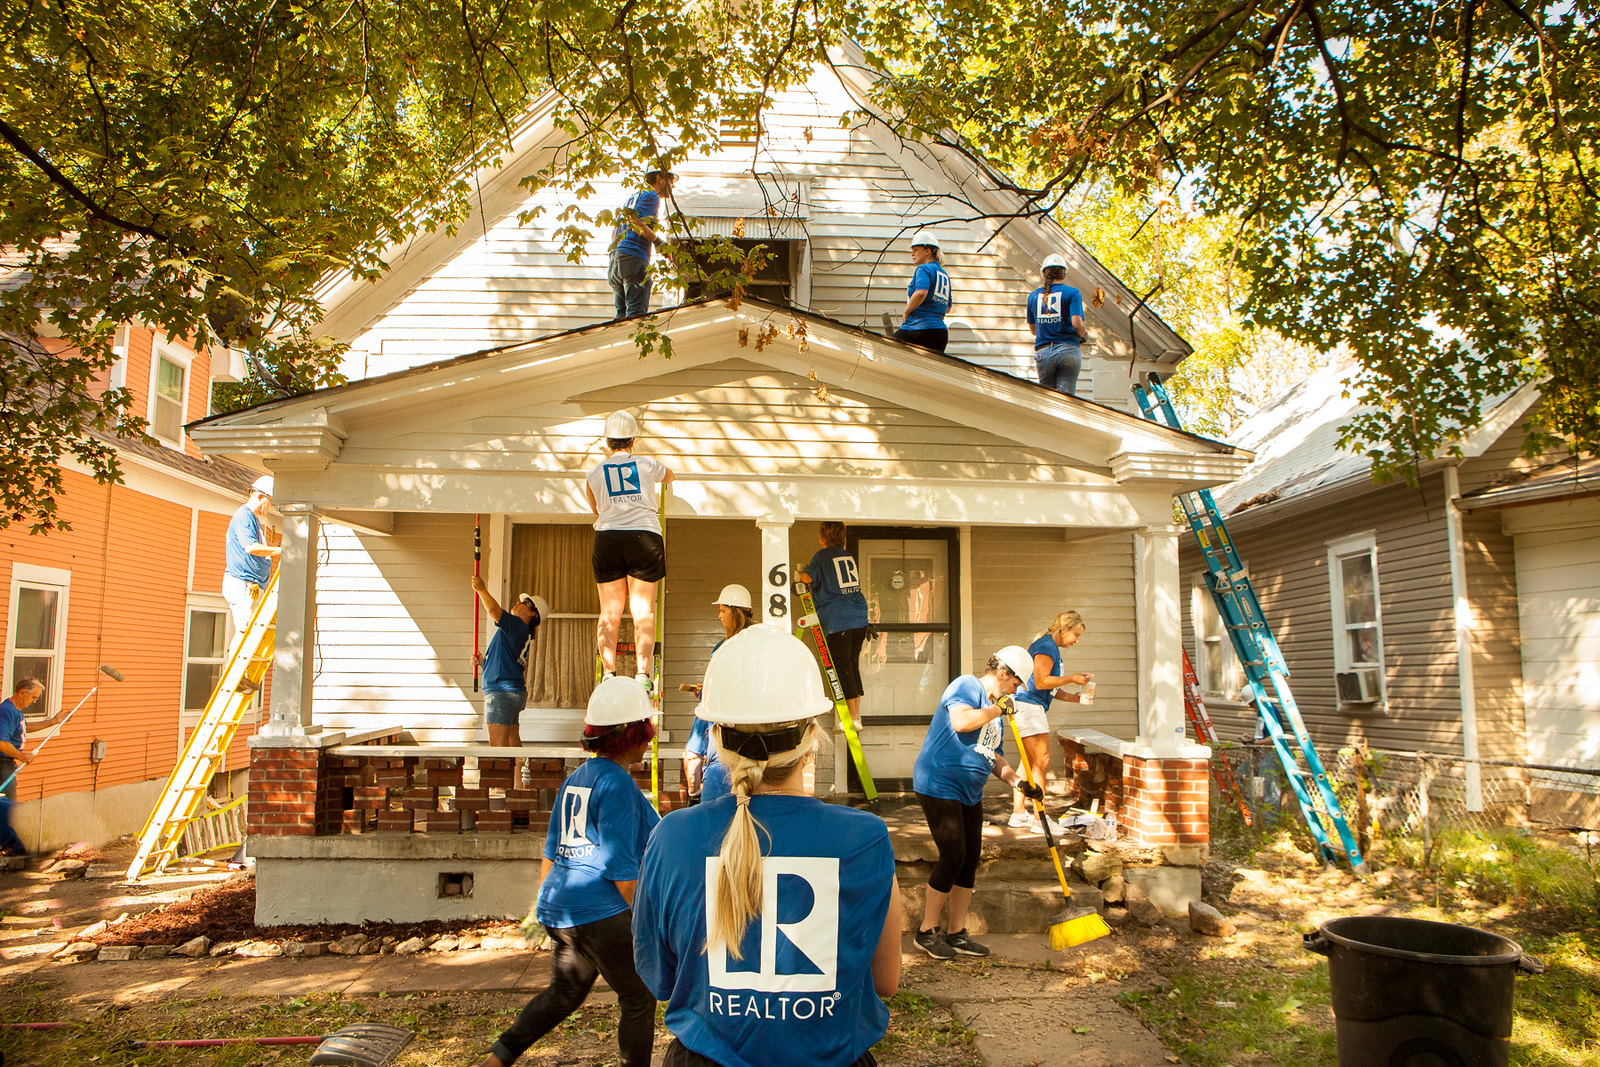 REALTORS working on a home at the 2019 REALTORS Rock the Block event.